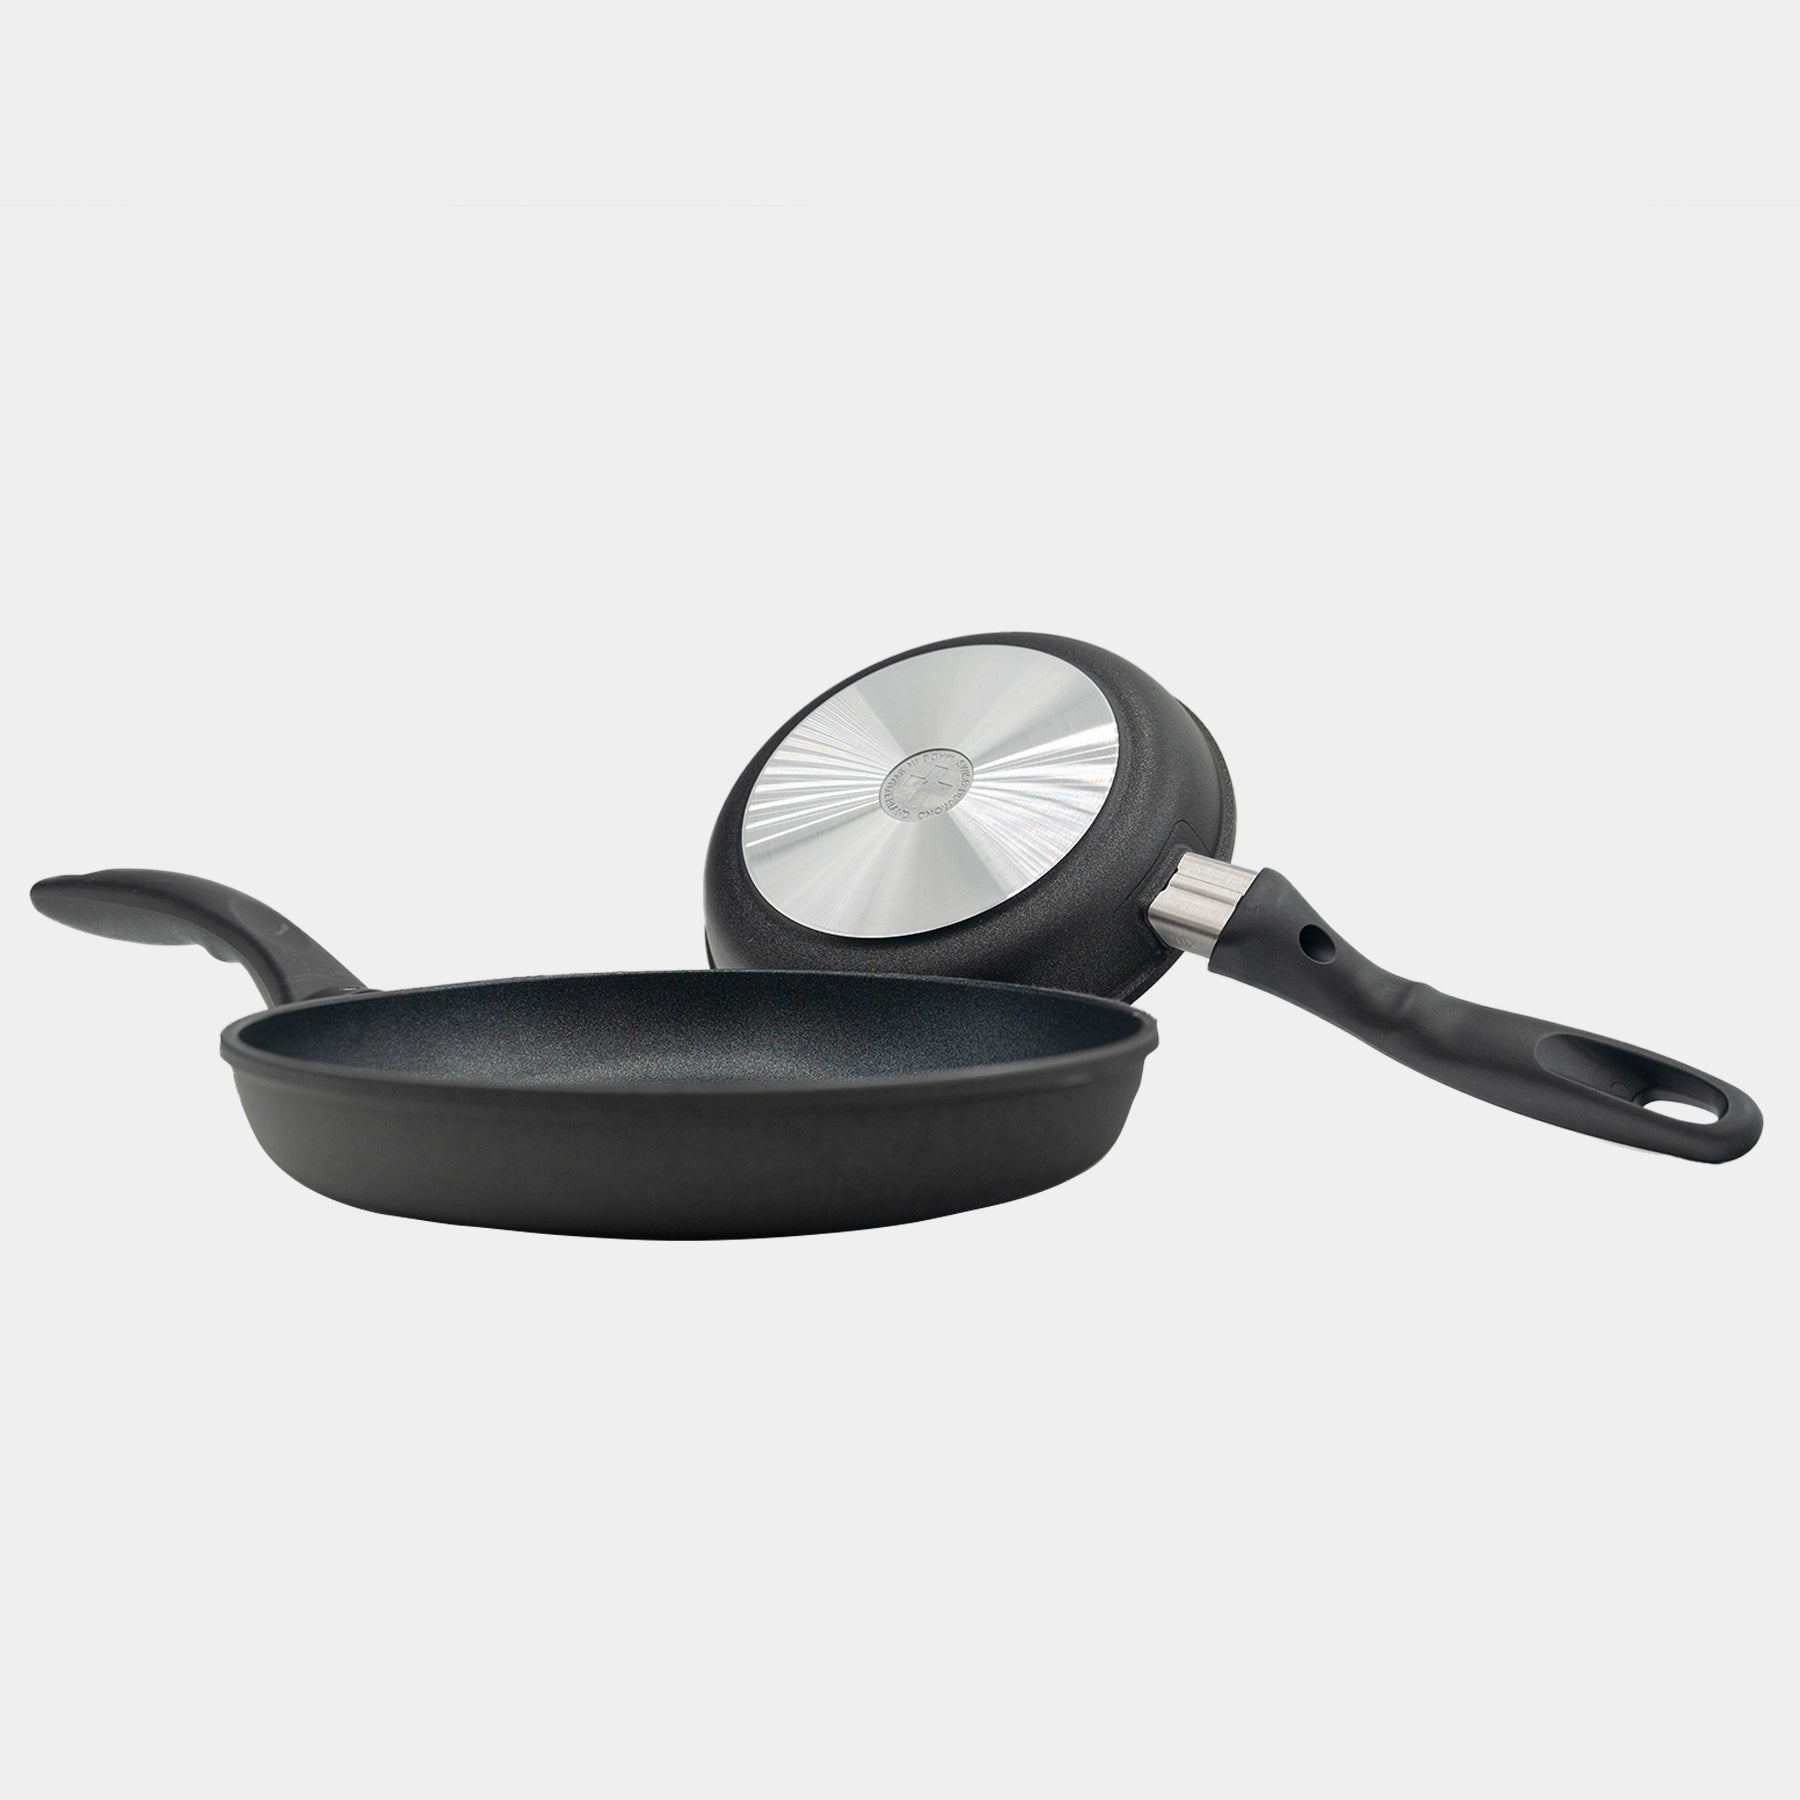 XD Nonstick 2-Piece Fry Pan Set side and bottom view